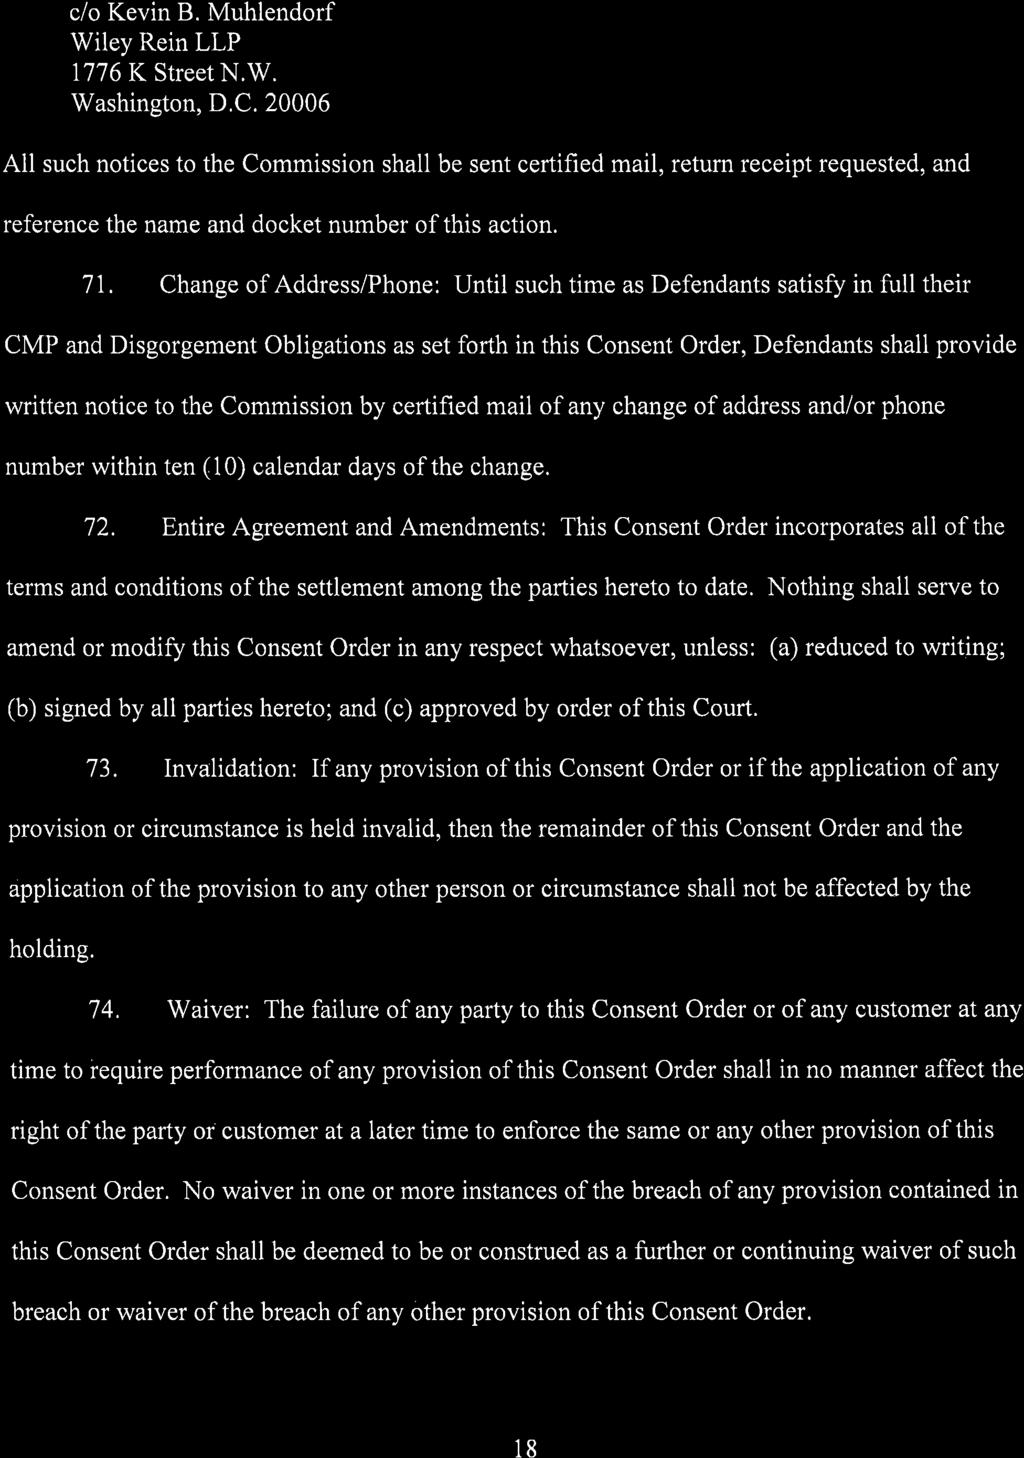 Case 1:18-cv-02243-TNM Document 14 Filed 03/04/19 Page 18 of 20 c/o Kevin B. Muhlendorf Wiley Rein LLP 1776 K Street N.W. Washington, D.C. 20006 All such notices to the Commission shall be sent certified mail, return receipt requested, and reference the name and docket number of this action.